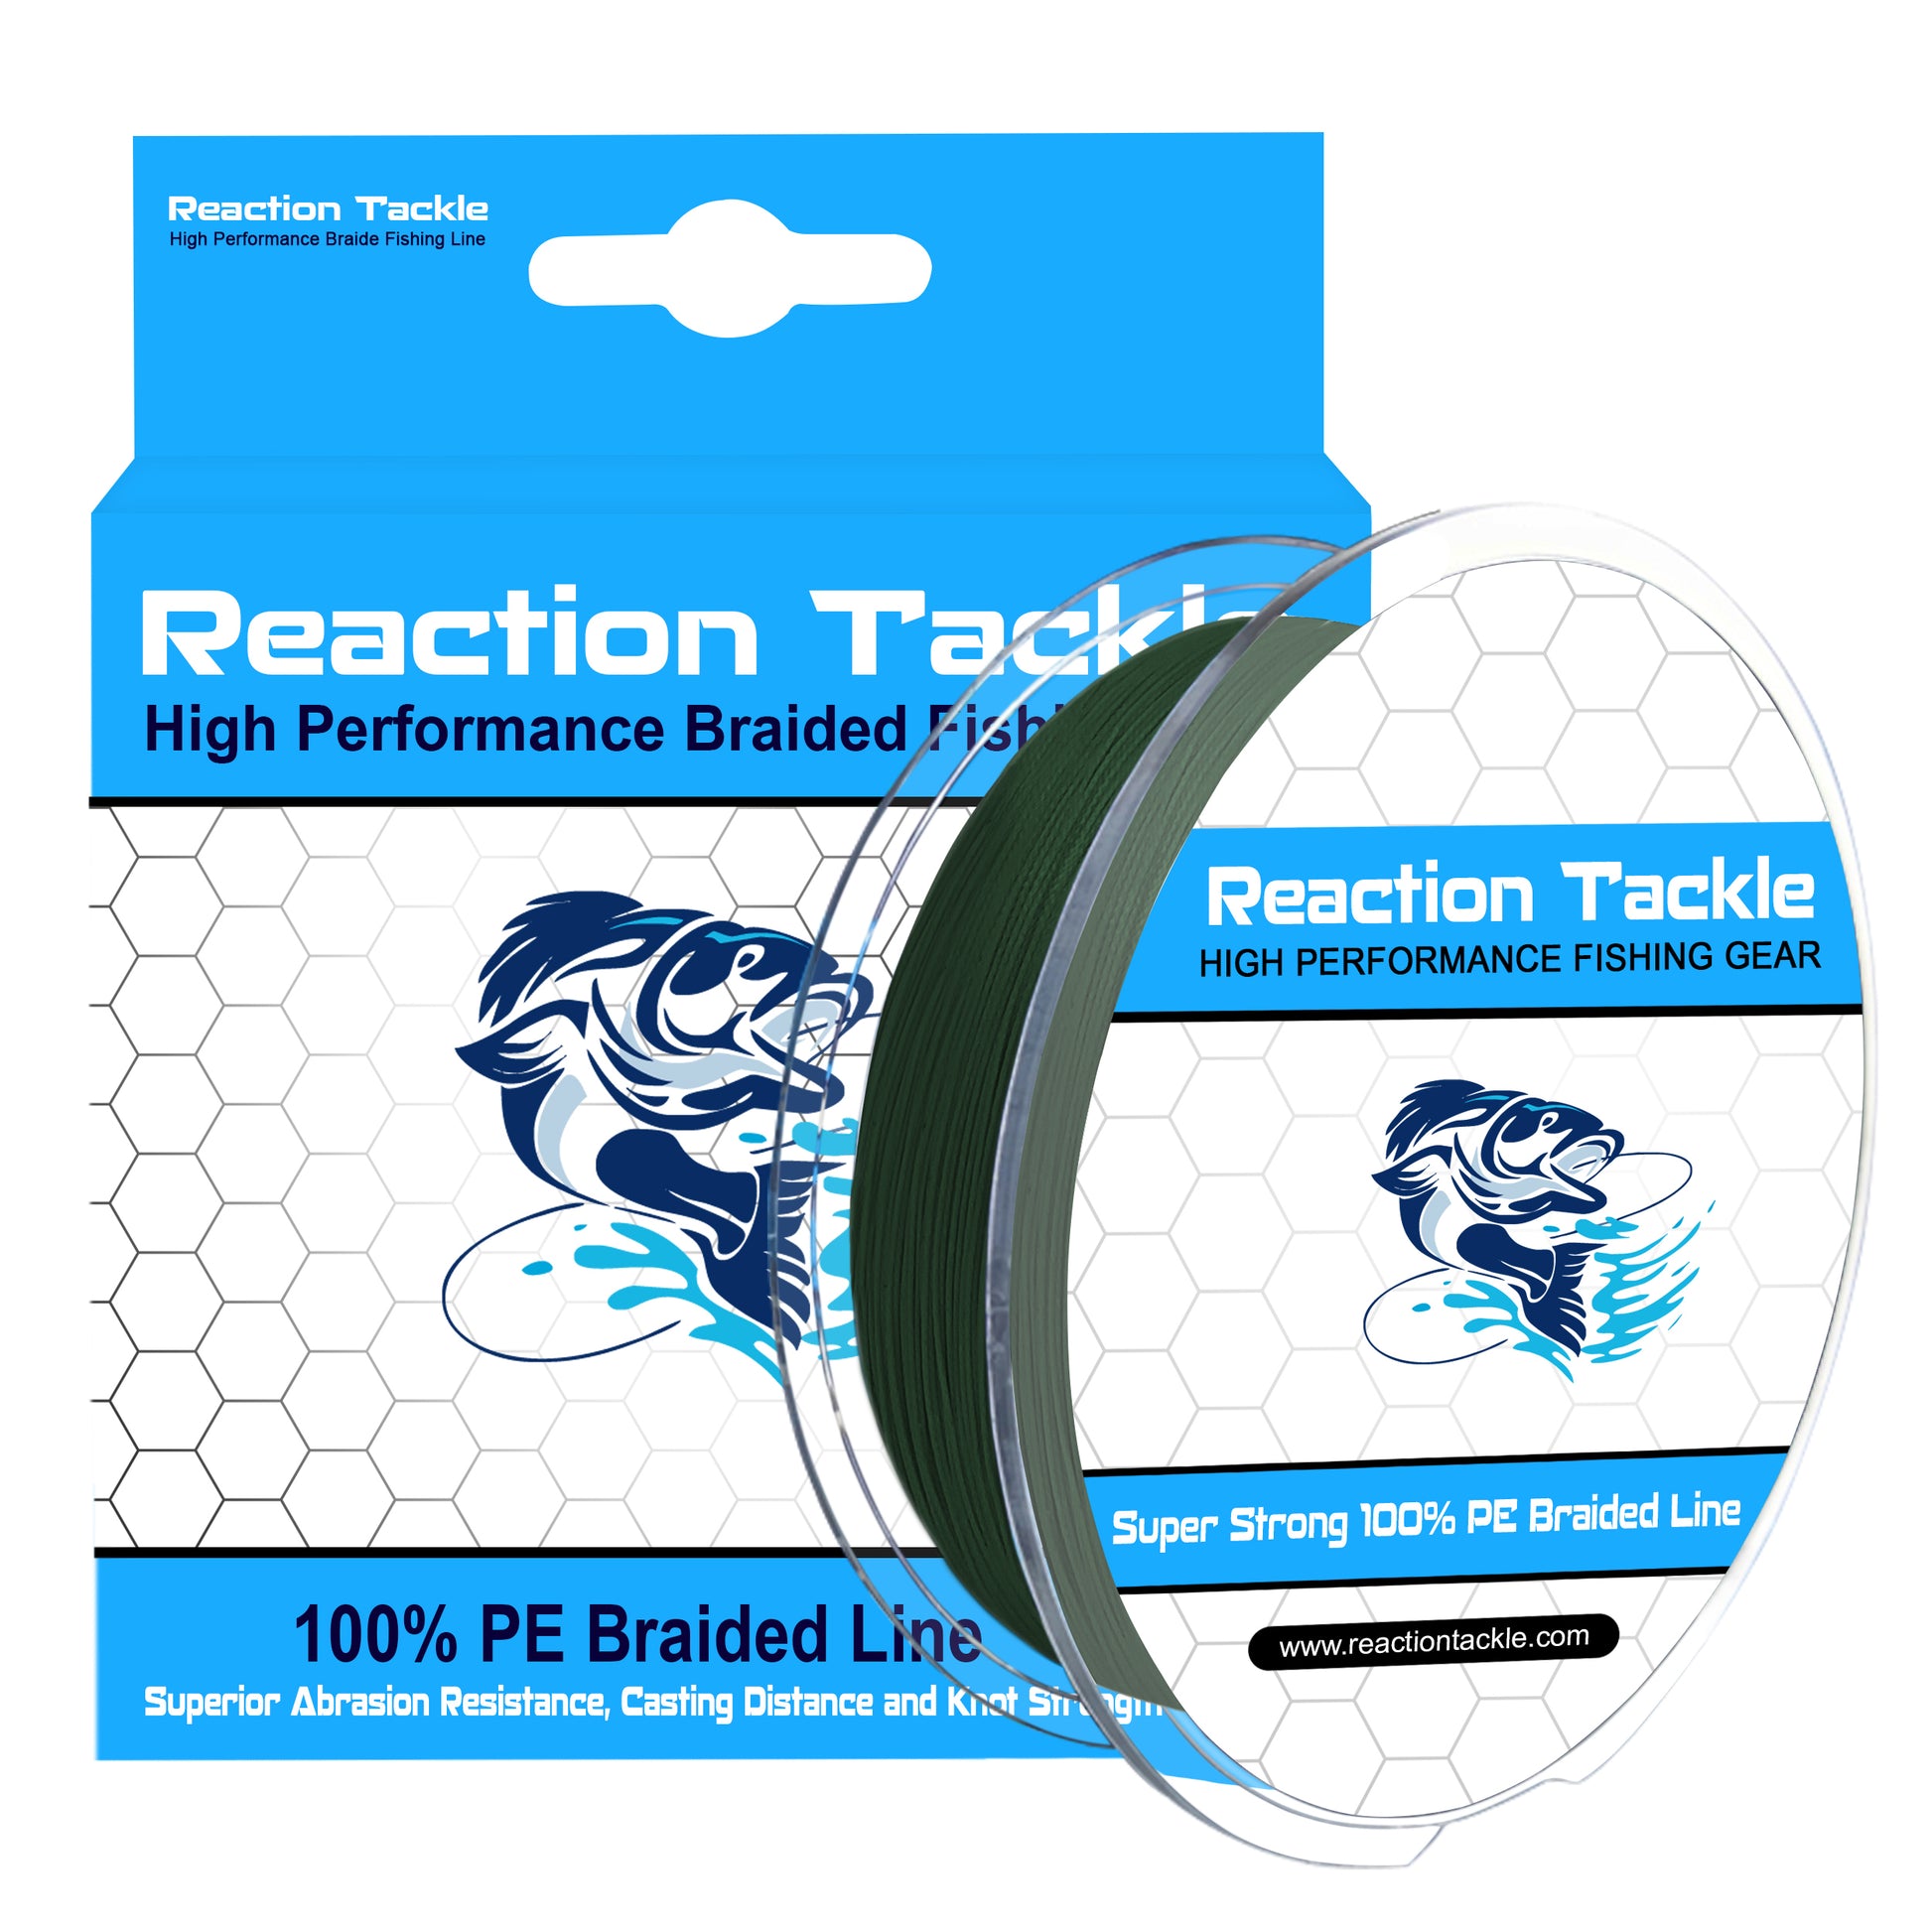 Reaction Tackle 9 Strand - Moss Green 50lb 300yd